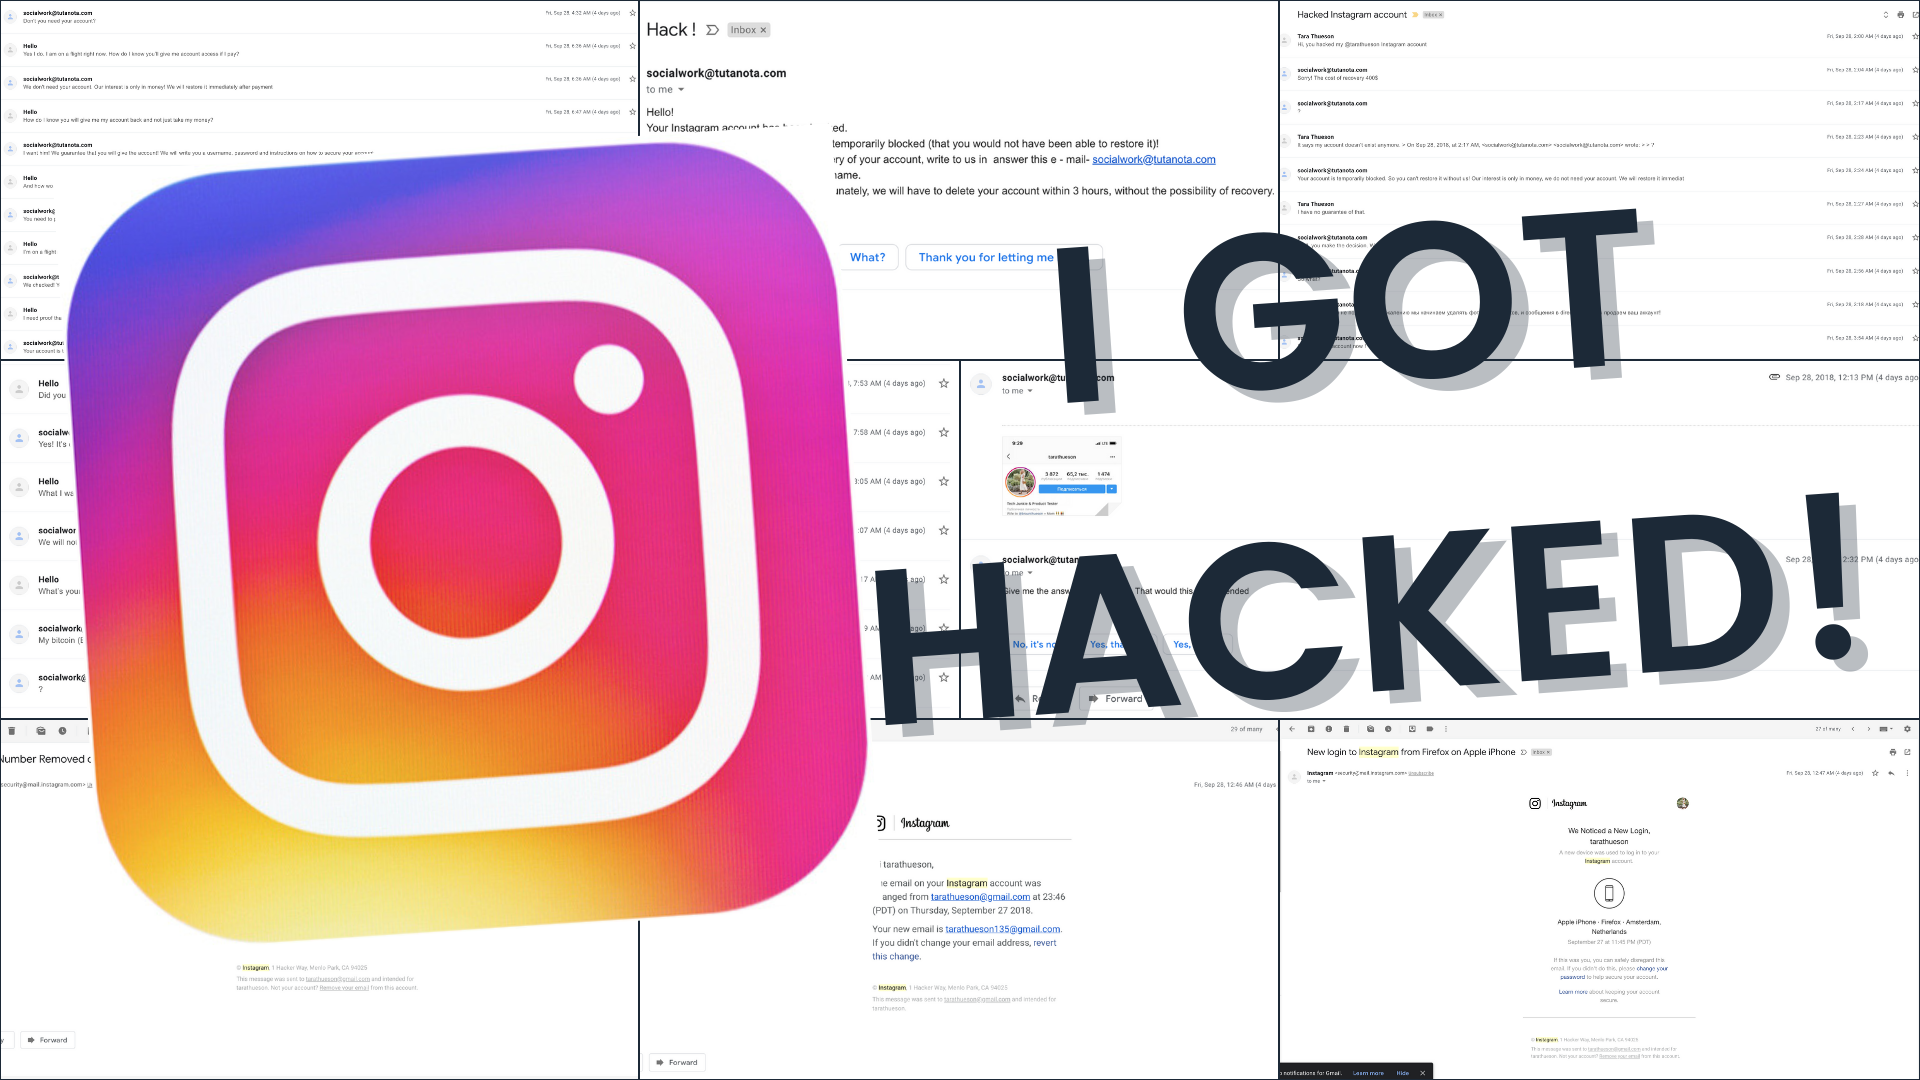 Instagram rolls out new tools to recover hacked accounts